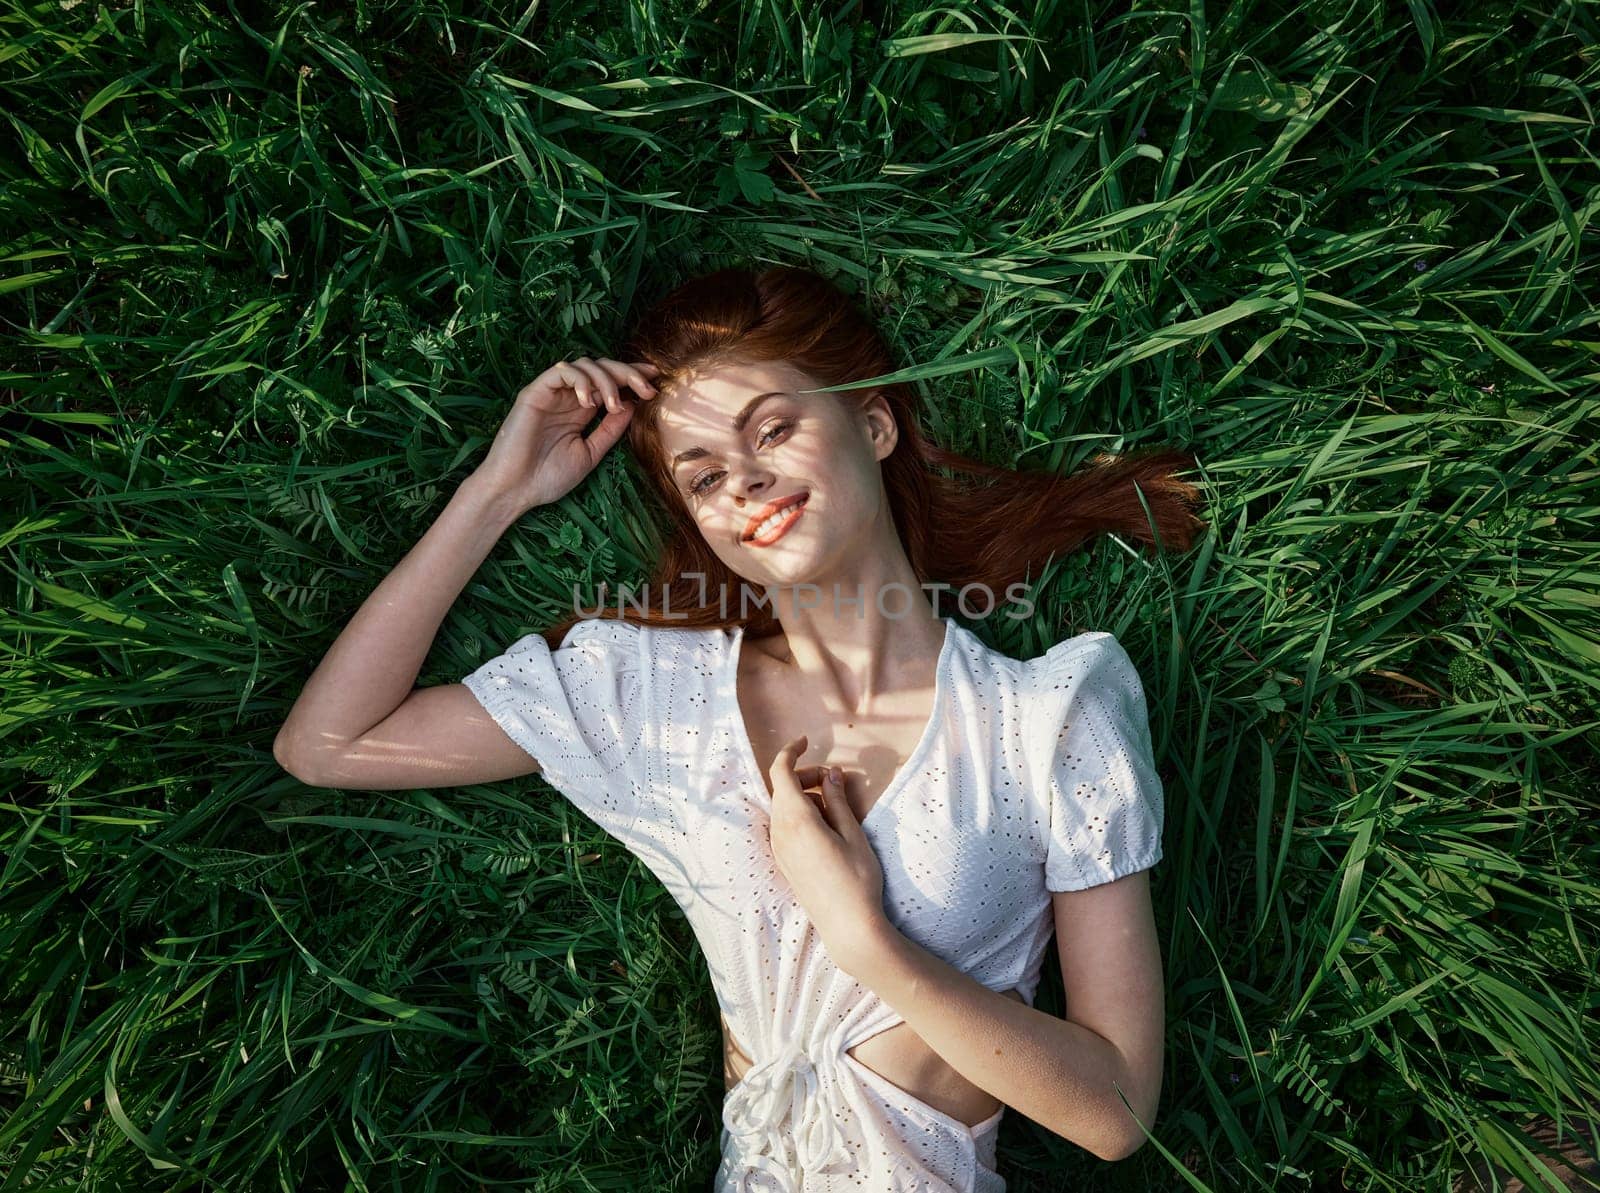 an elegant woman in a light dress lies in the grass and enjoys life by Vichizh